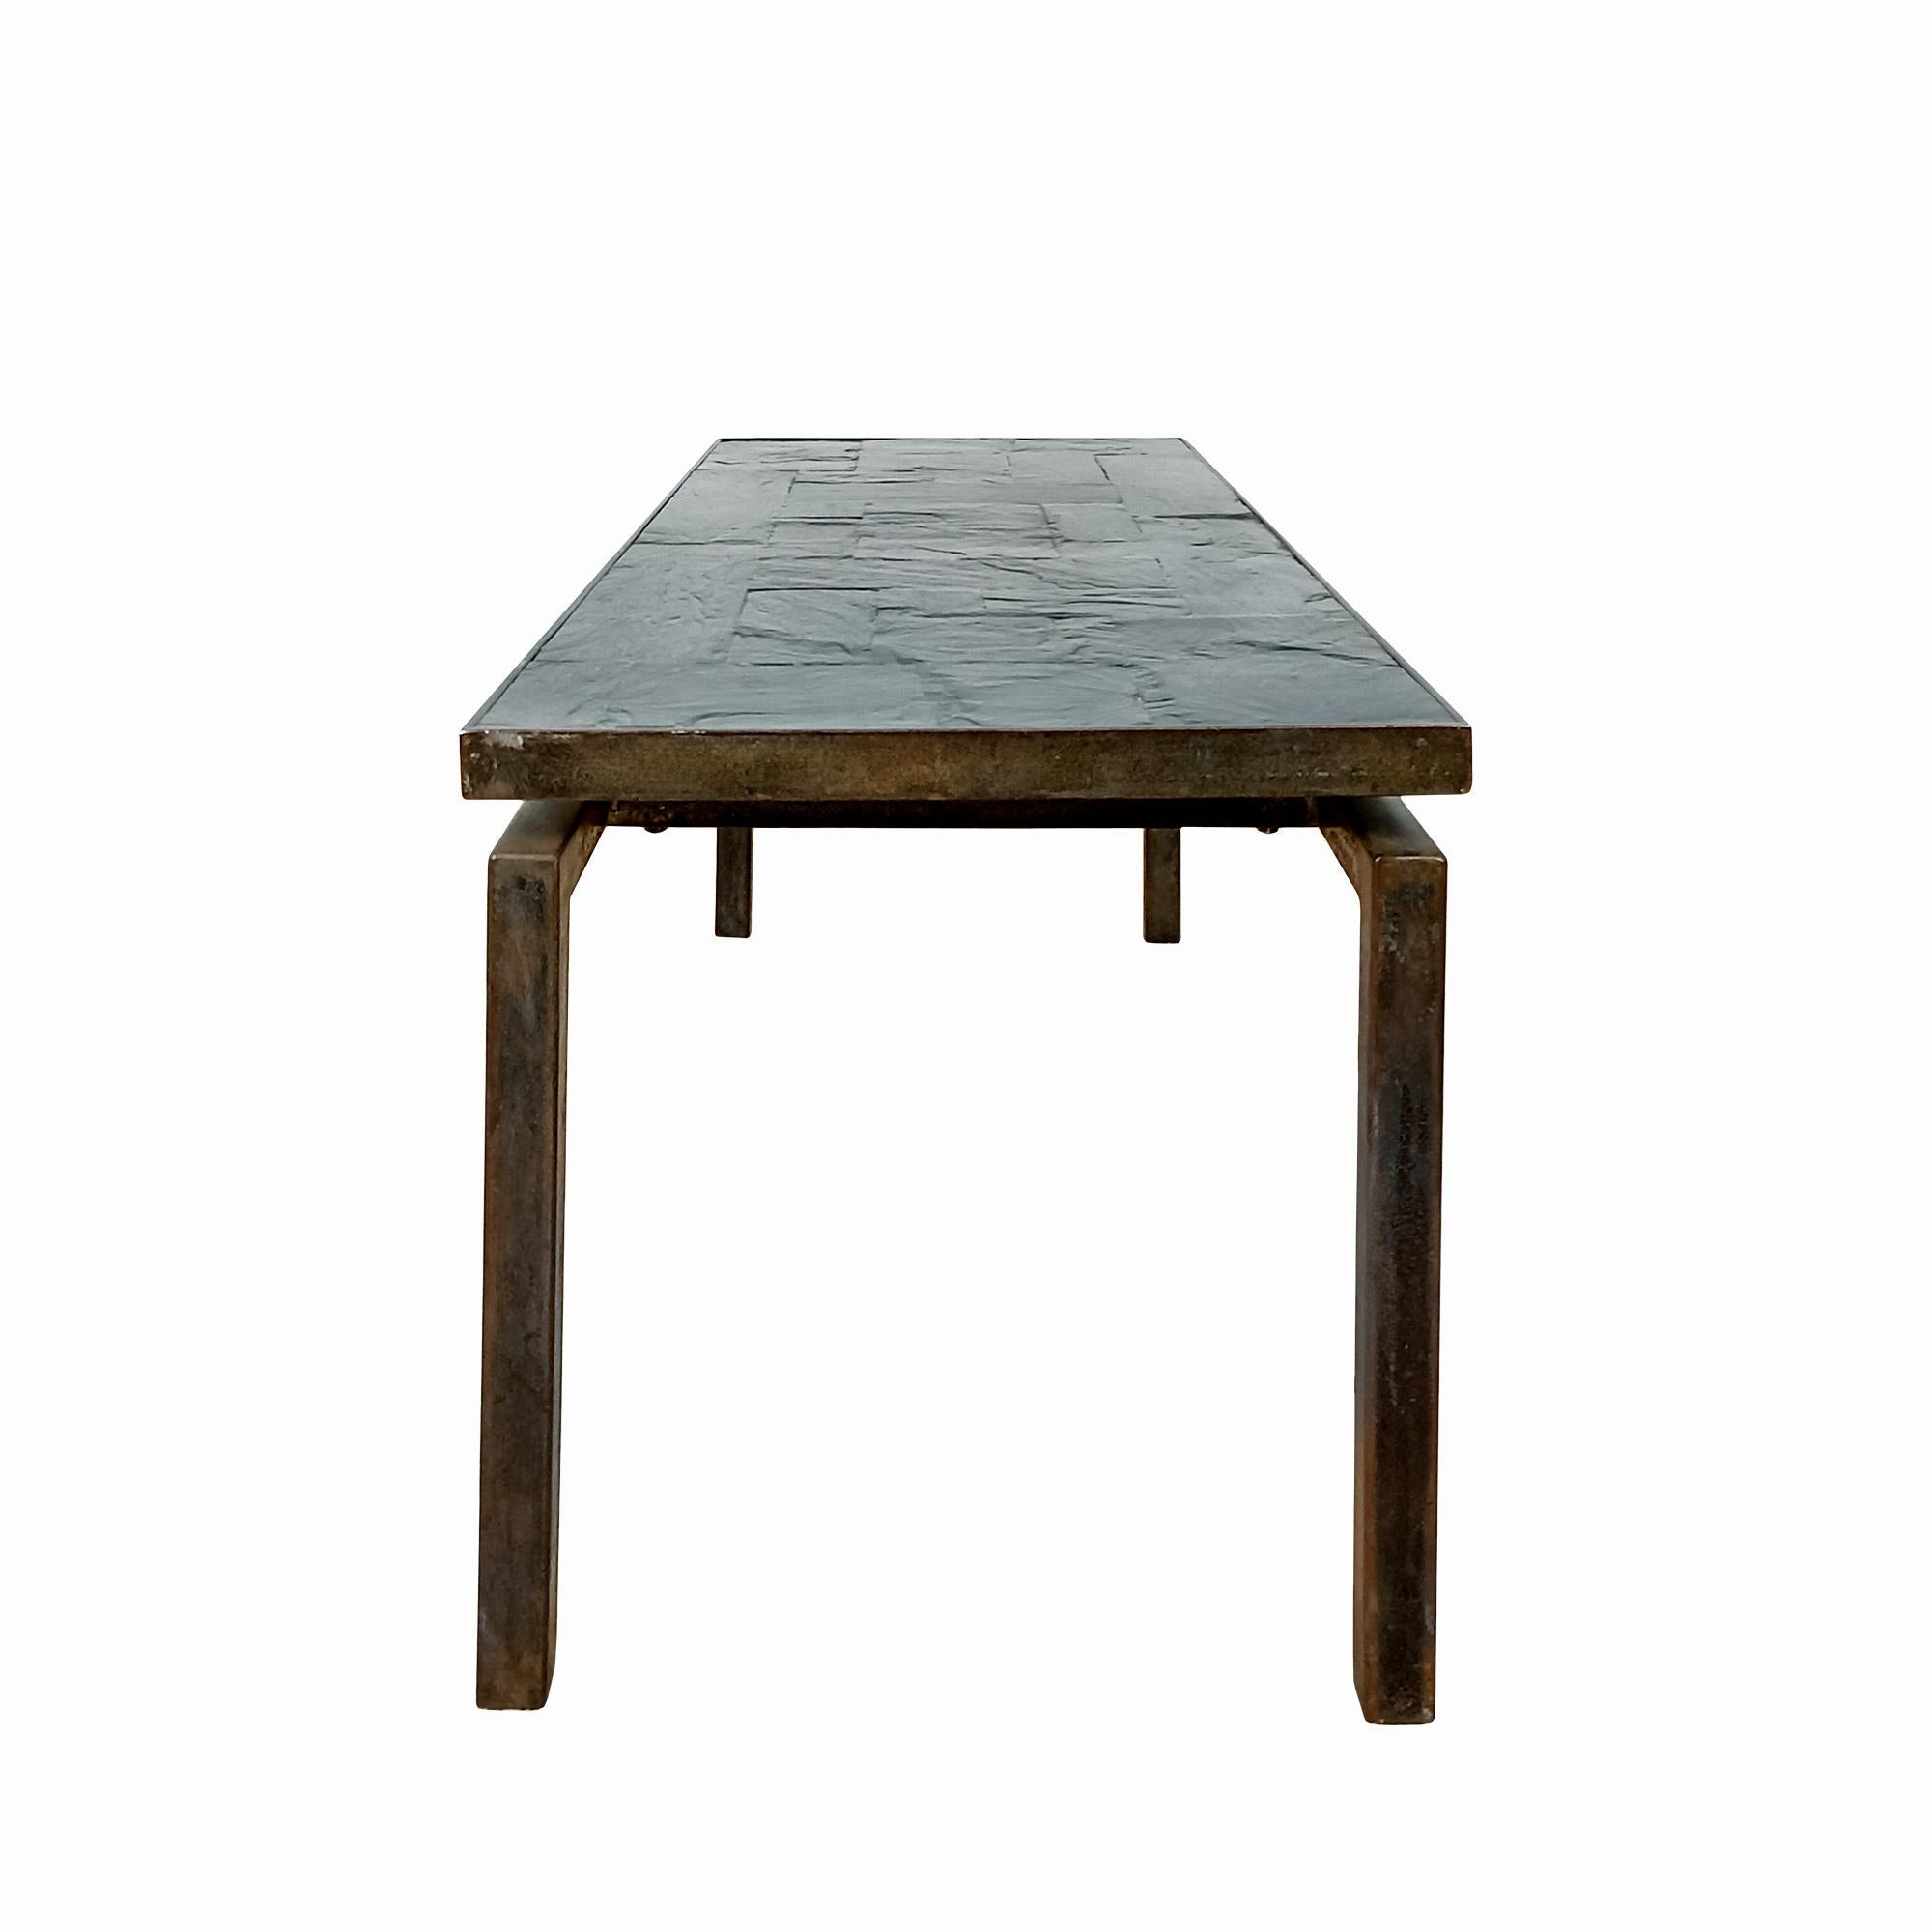 French Mid-Century Modern Thick Slate Coffee Table In A Steel Frame - France, 1970 For Sale